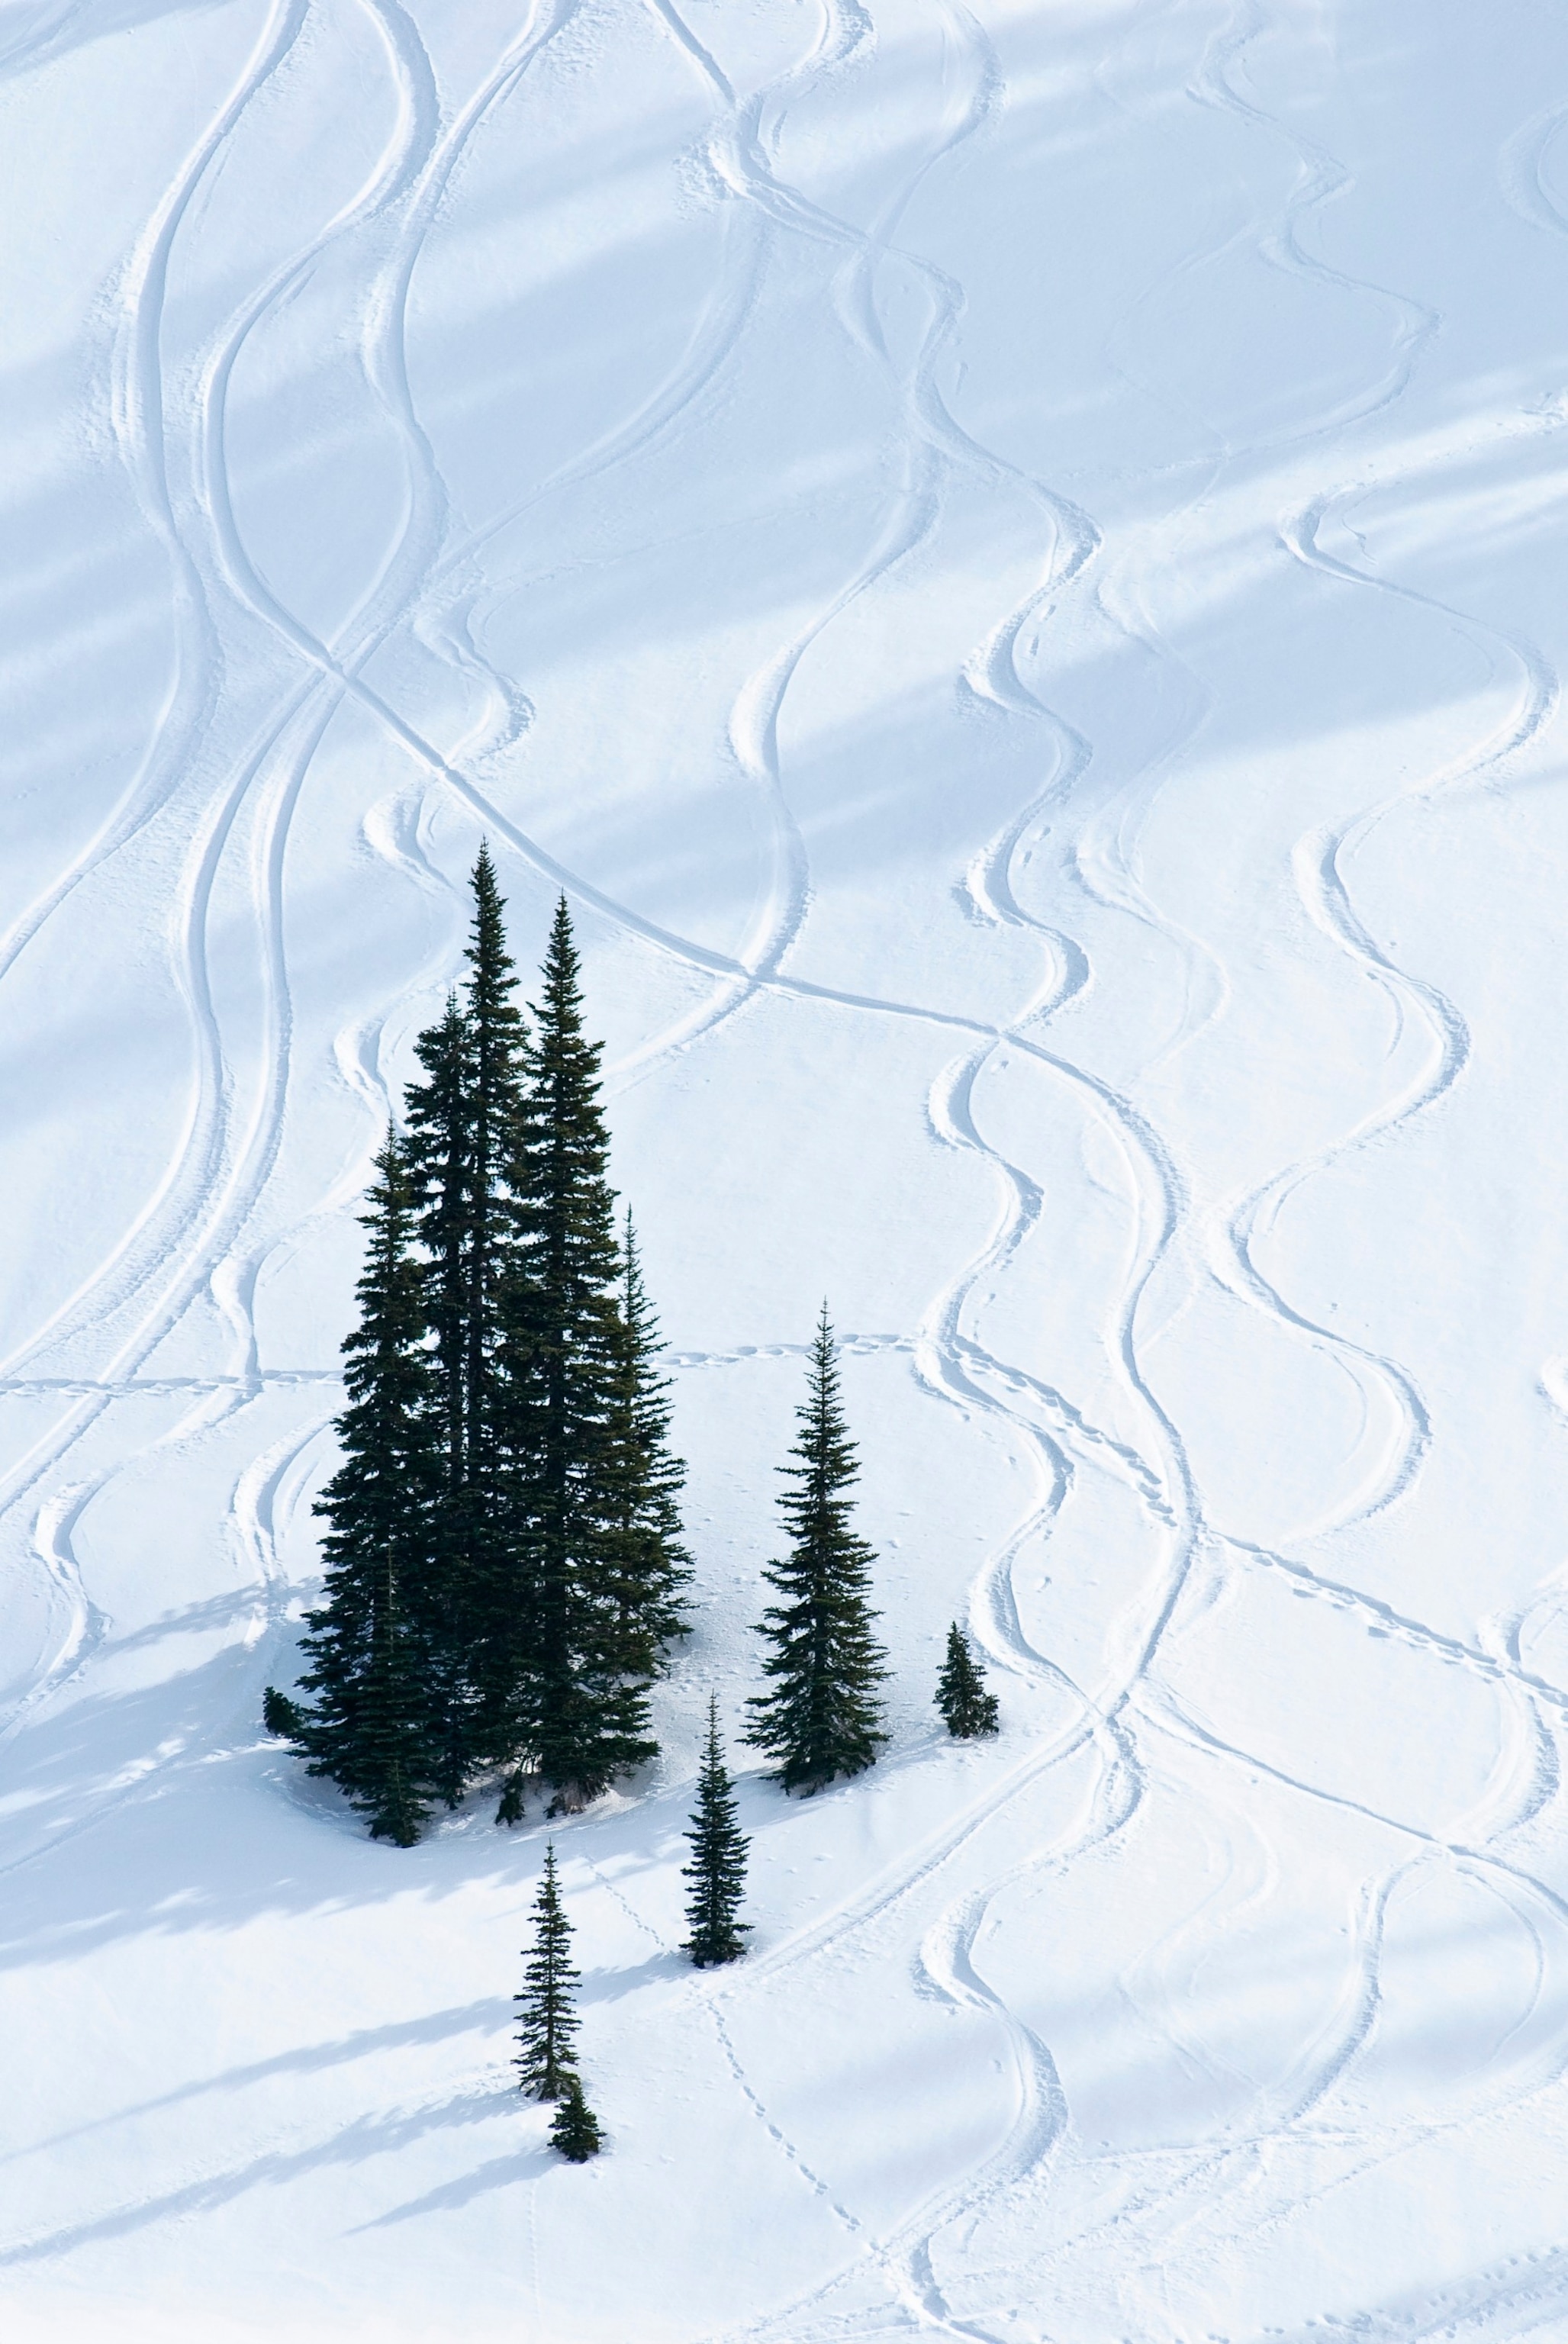 PHOTO: Trees and tracks in snow, Paradise Valley; Mount Rainier National Park, WA. 